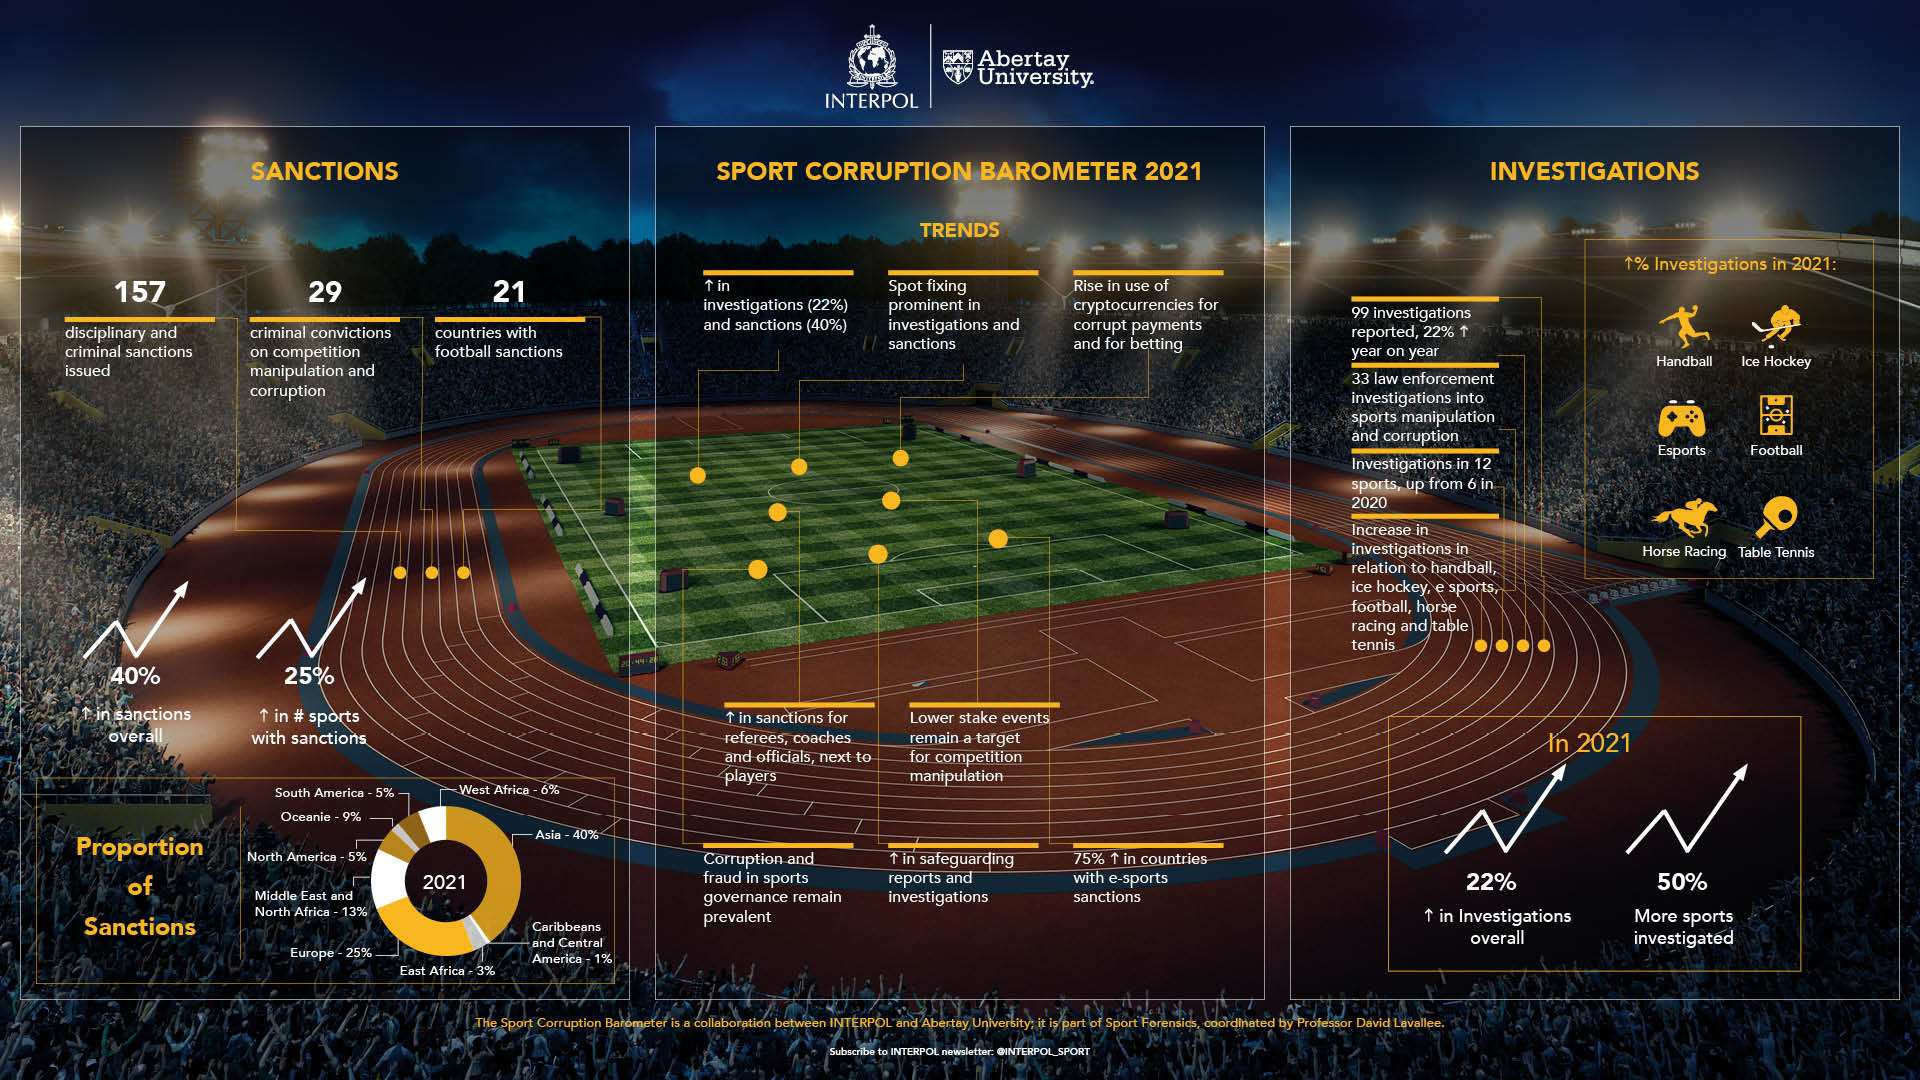 Sport Corruption 2021 - image shows sanctions, investigations and trends